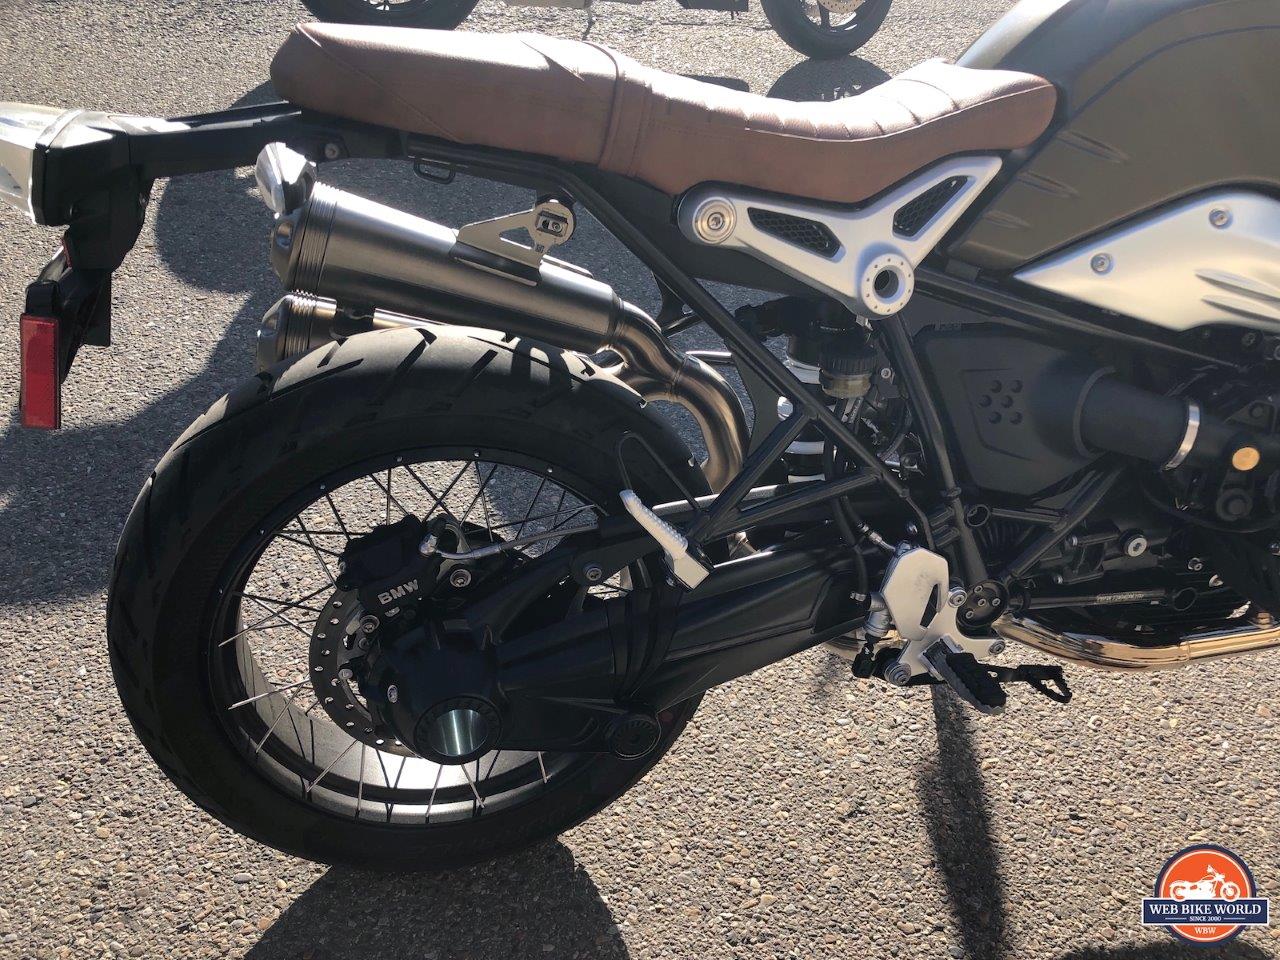 A close-up of the location of the airbox on the new 2021 BMW R NineT Scrambler prio to WBW's demo ride